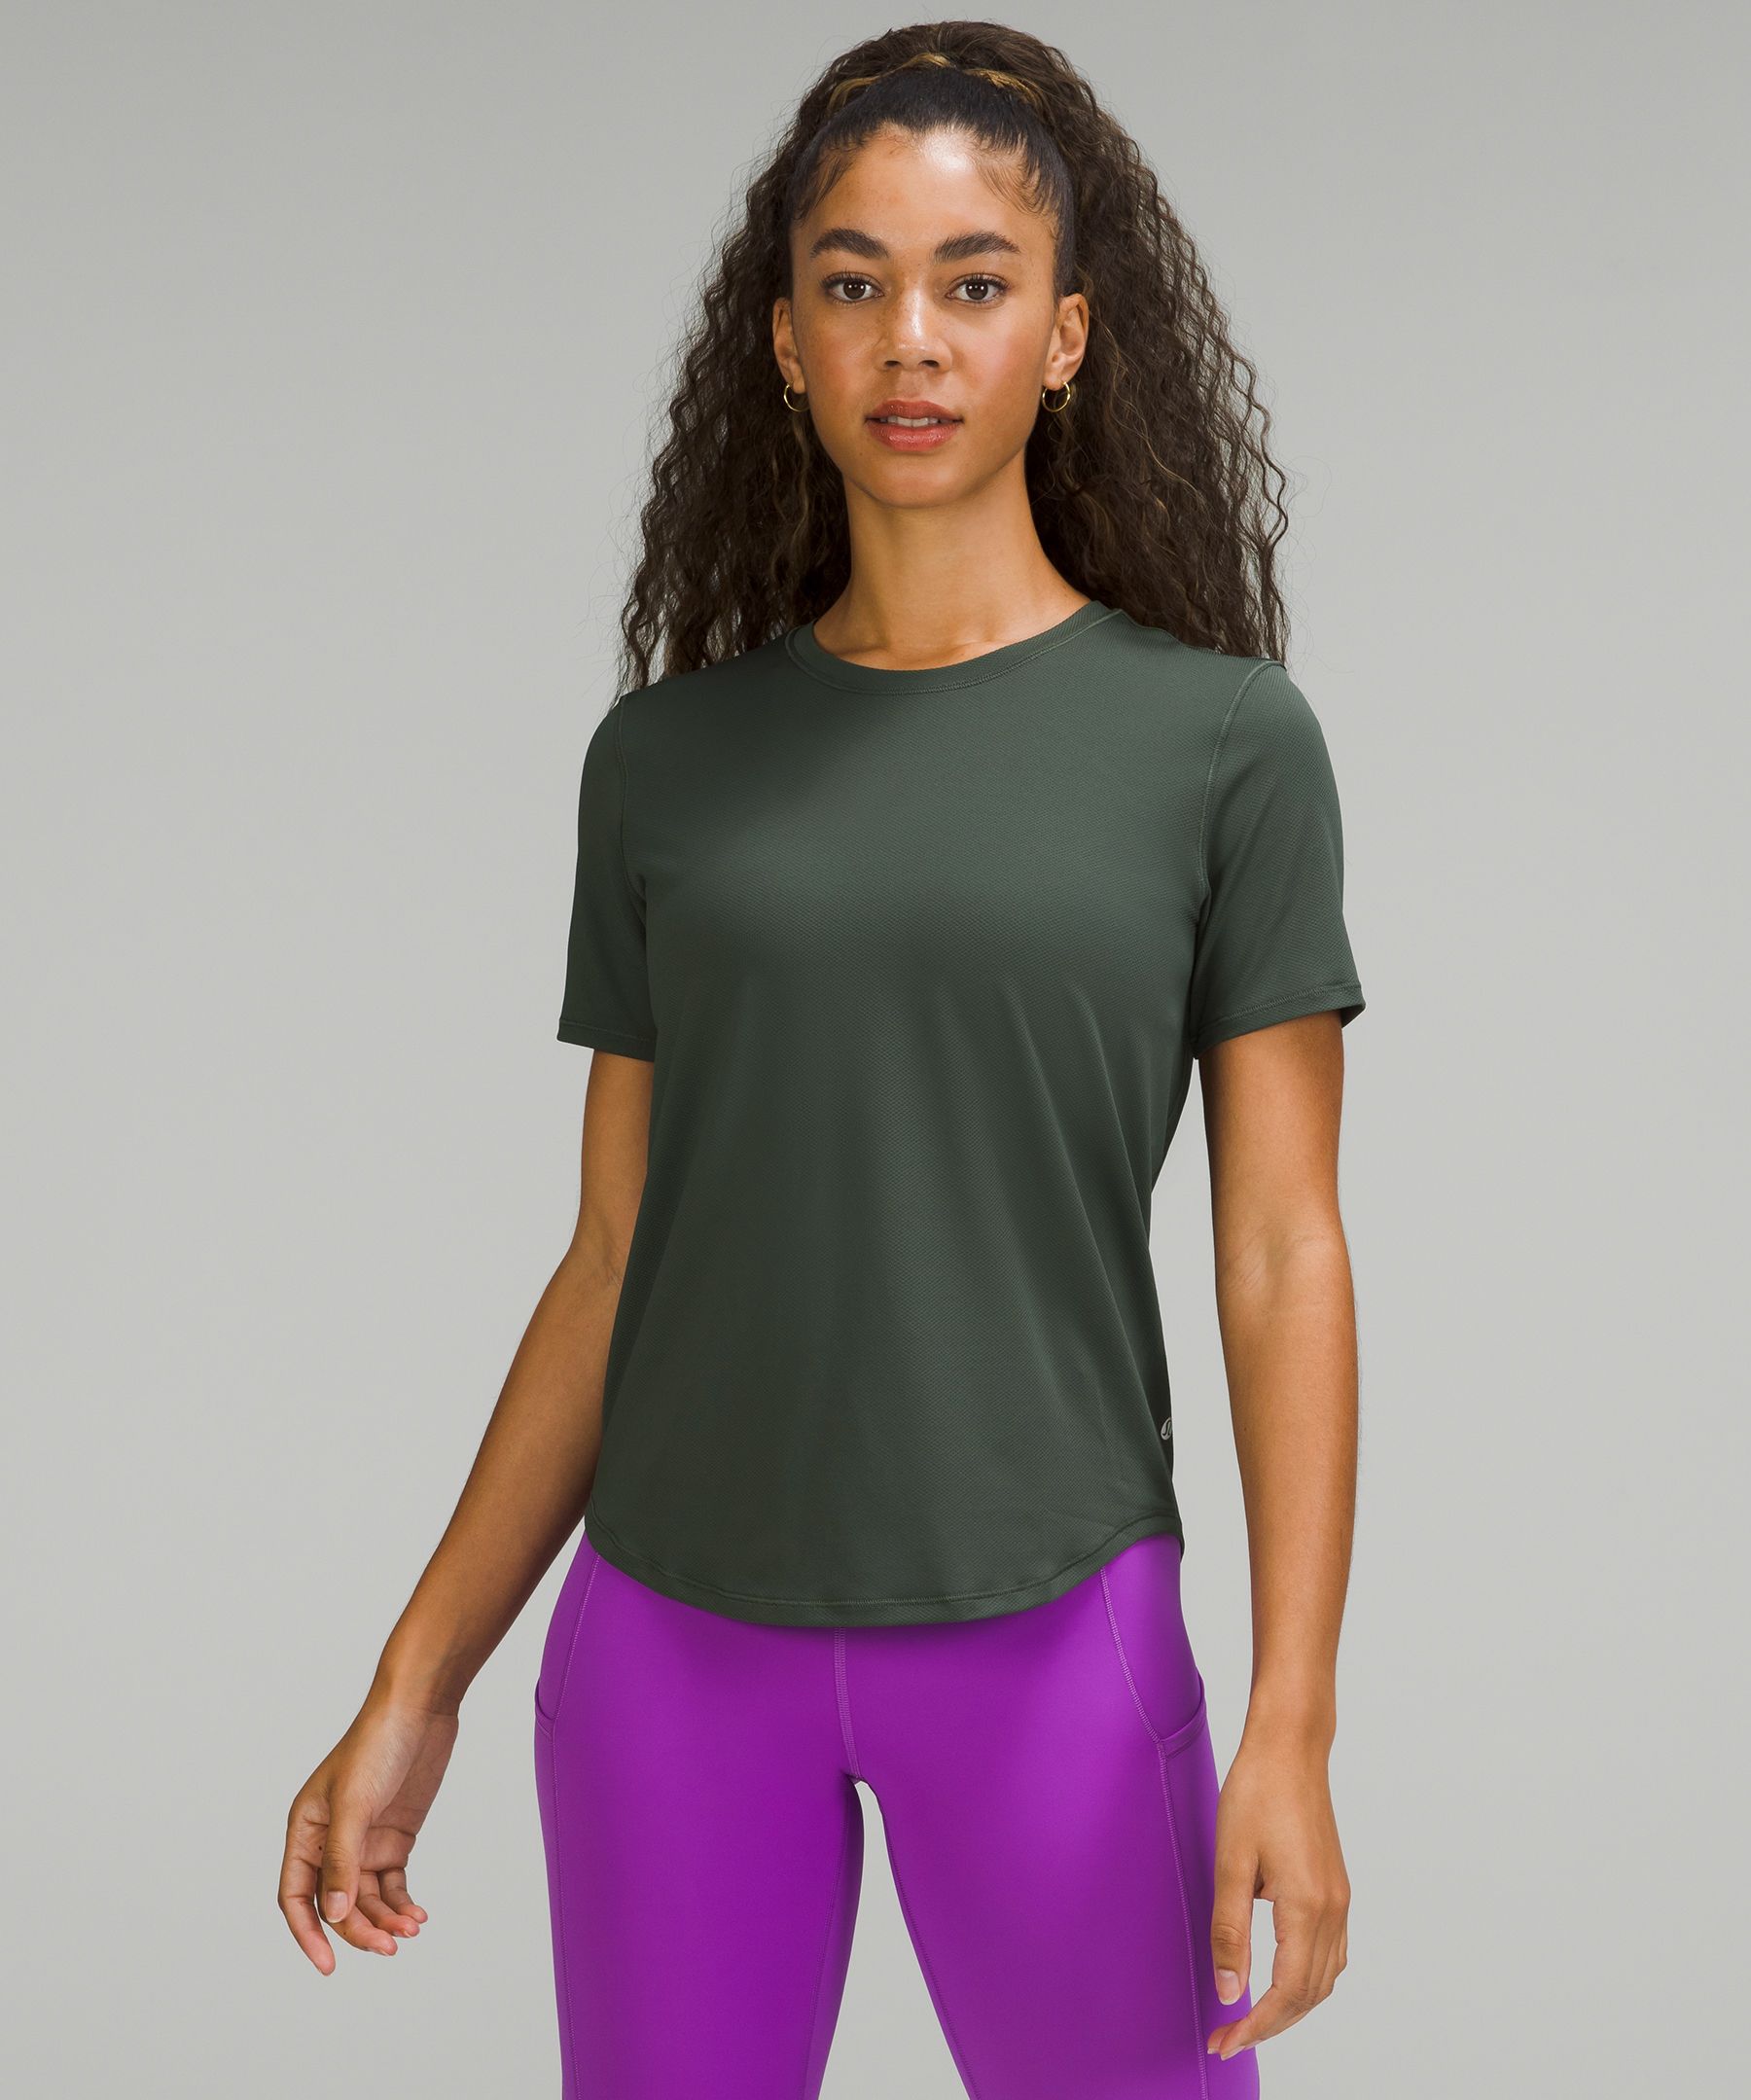 Lululemon High-neck Running And Training T-shirt In Smoked Spruce